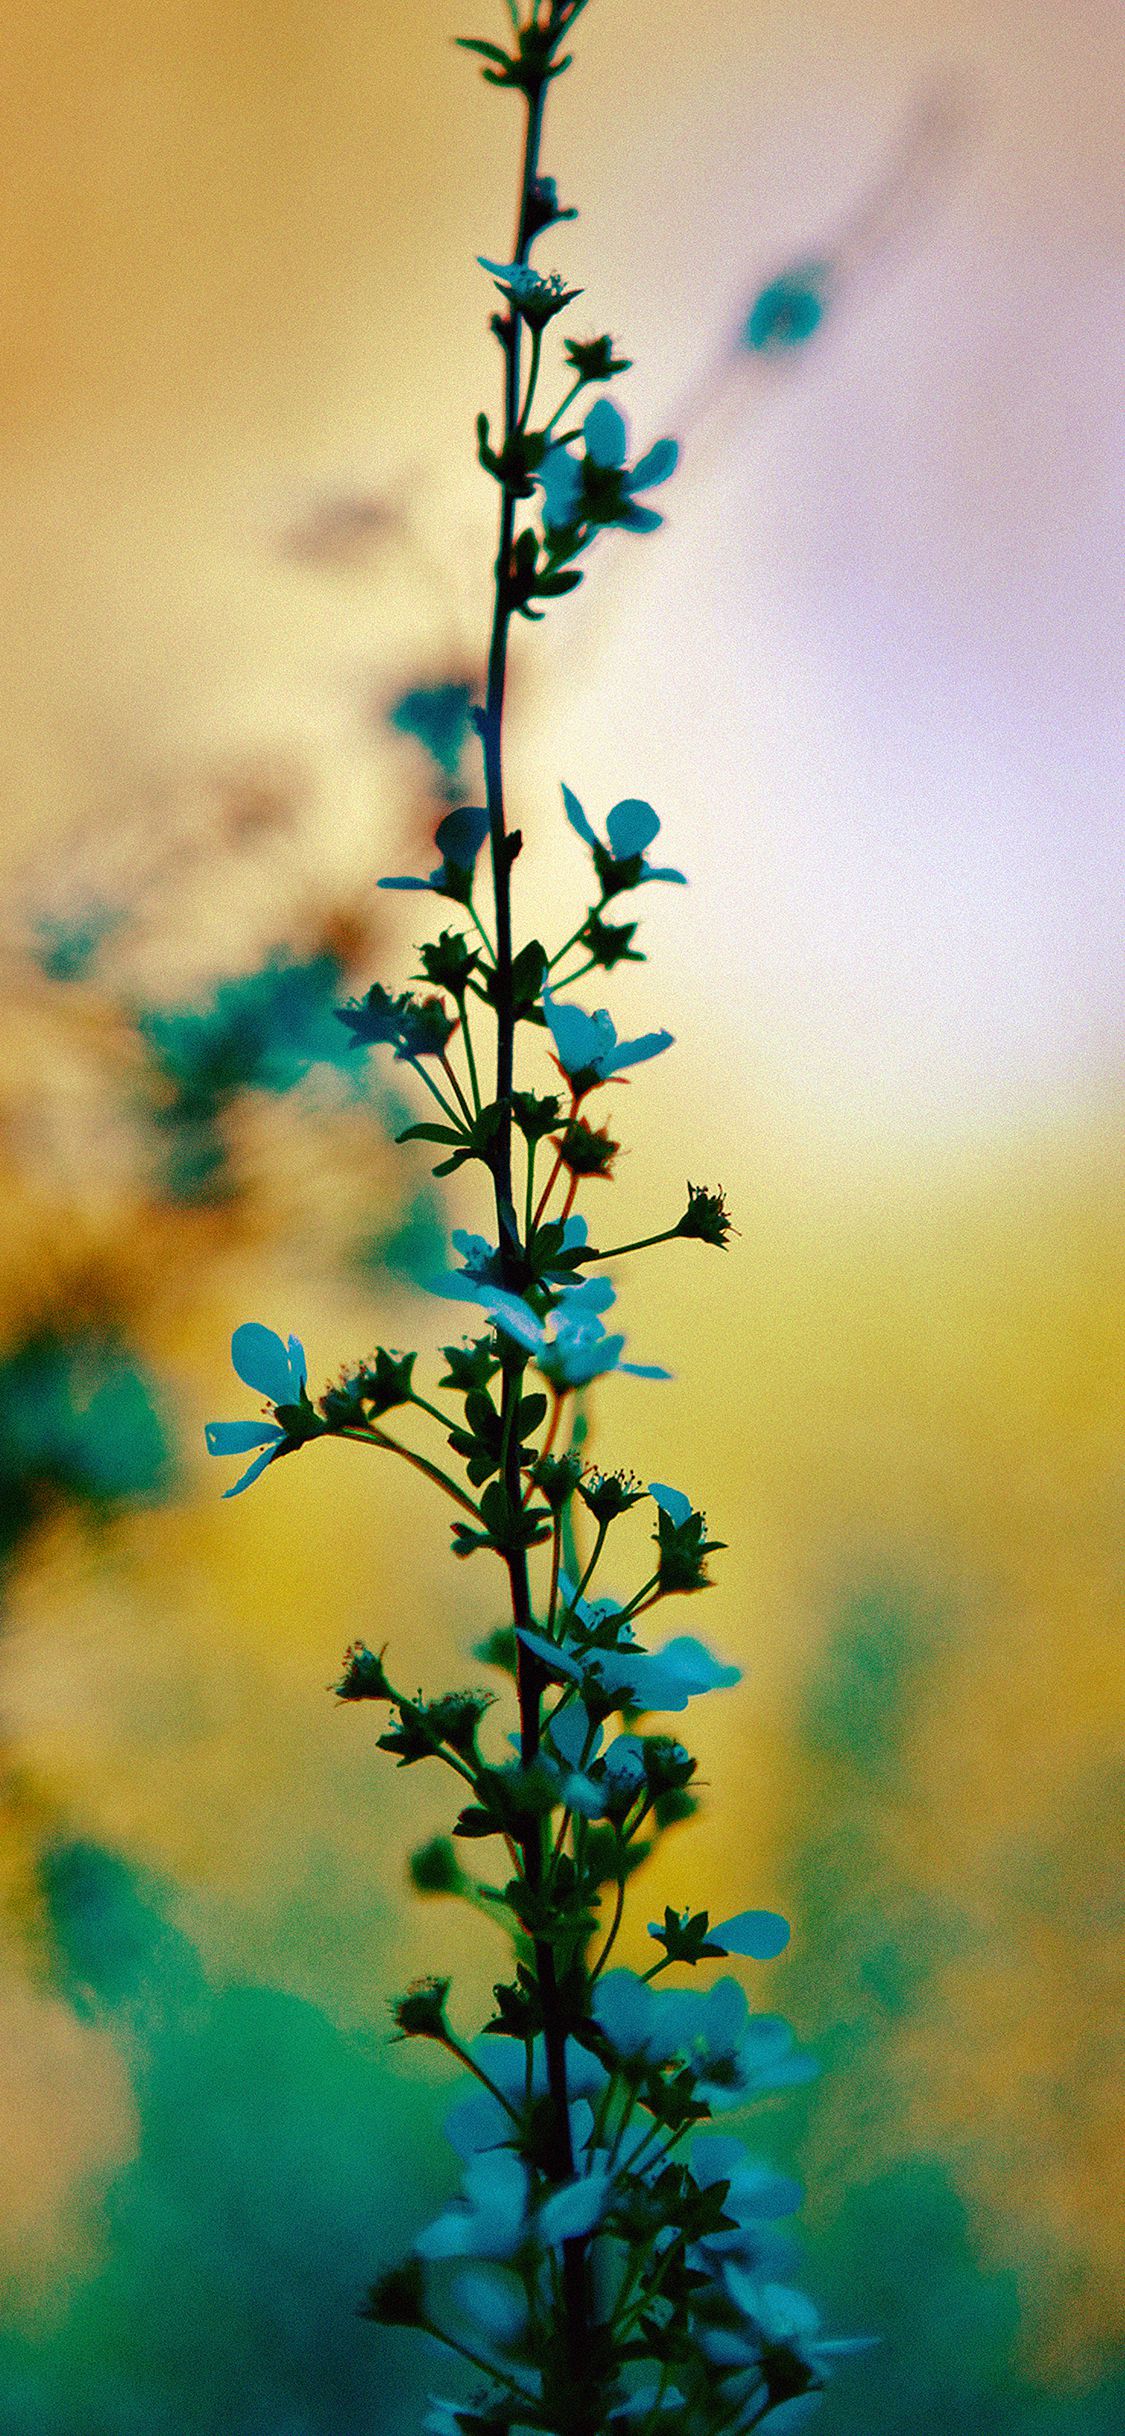 Blue flower sunny bright day bokeh iPhone X Wallpaper Free Download